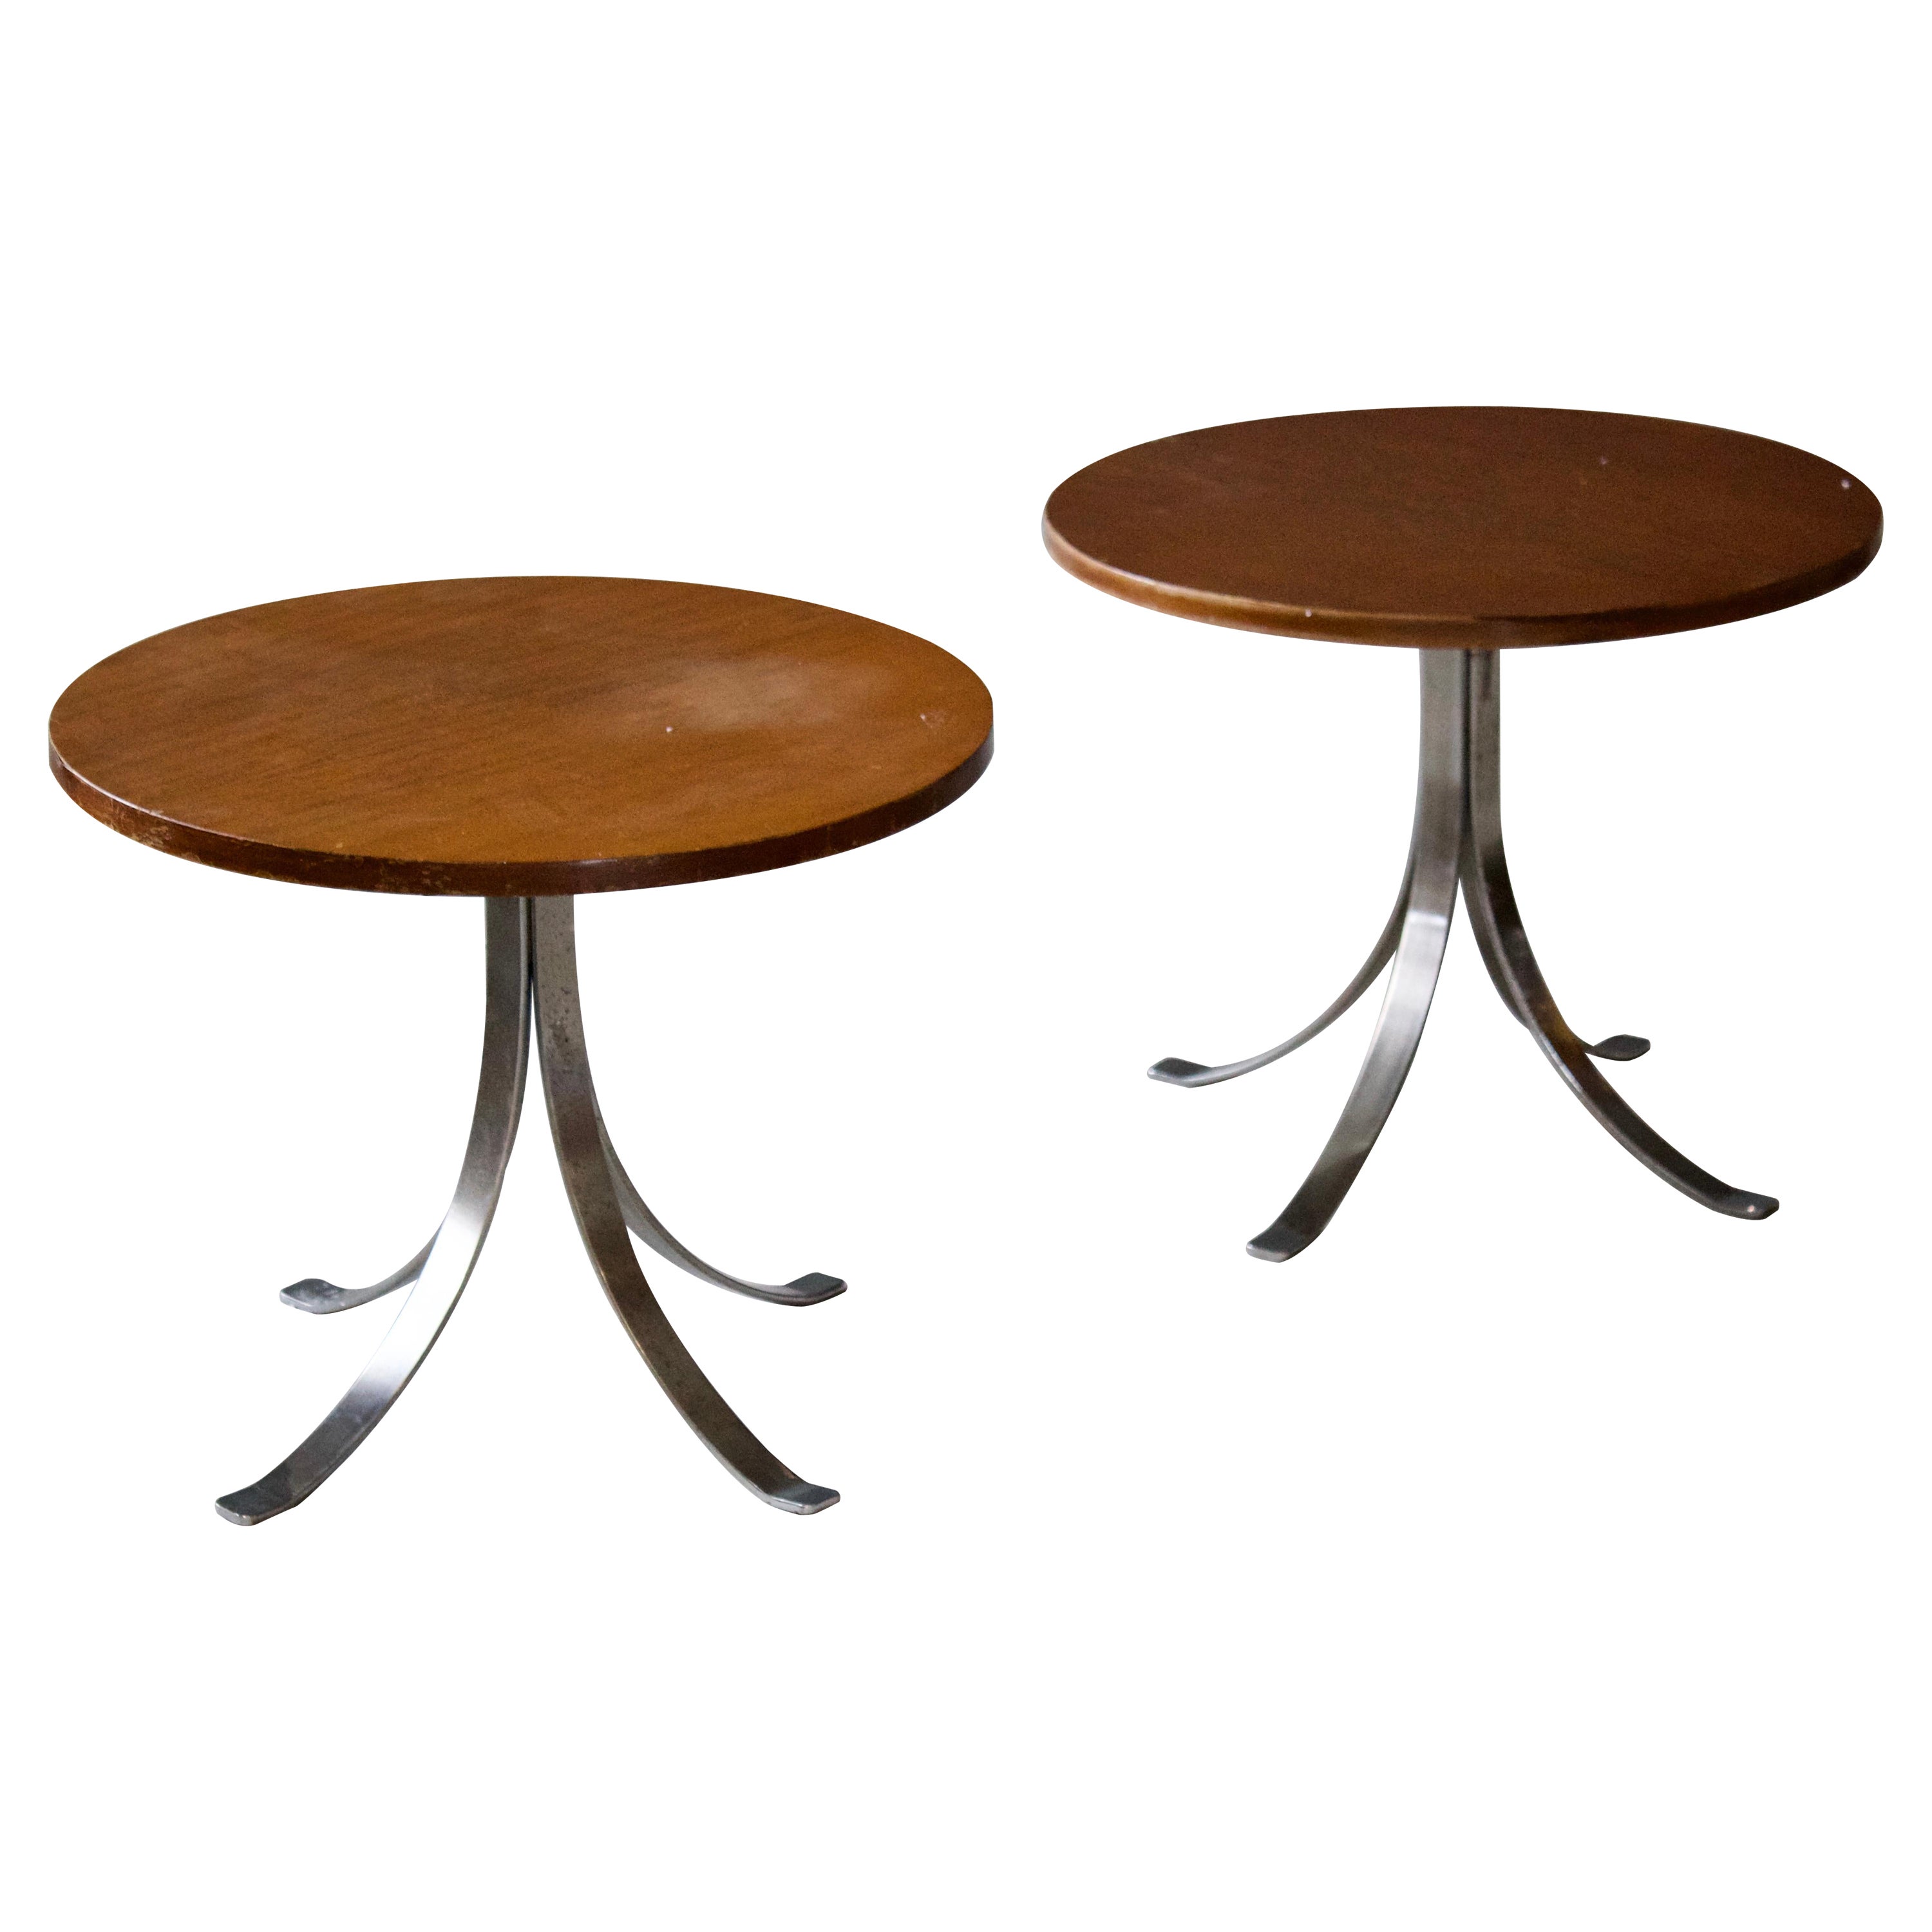 Gastone Rinaldi 'Attributed' Side Tables, Wood, Metal, RIMA, Italy, 1950s For Sale